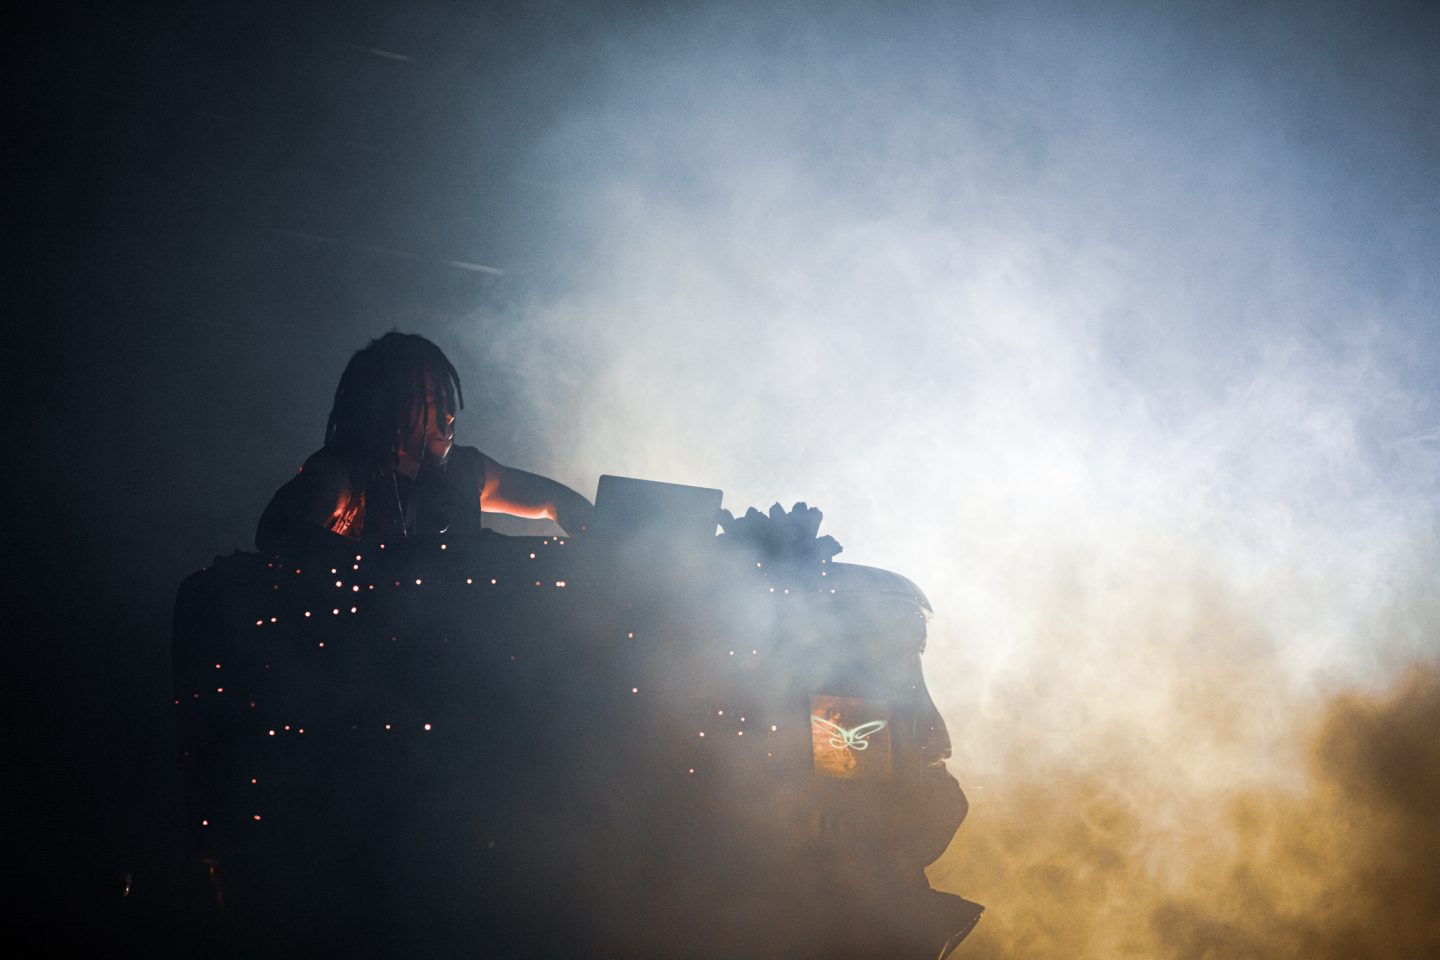 Flying Lotus at The Vic Theatre by Liina Raud Photography